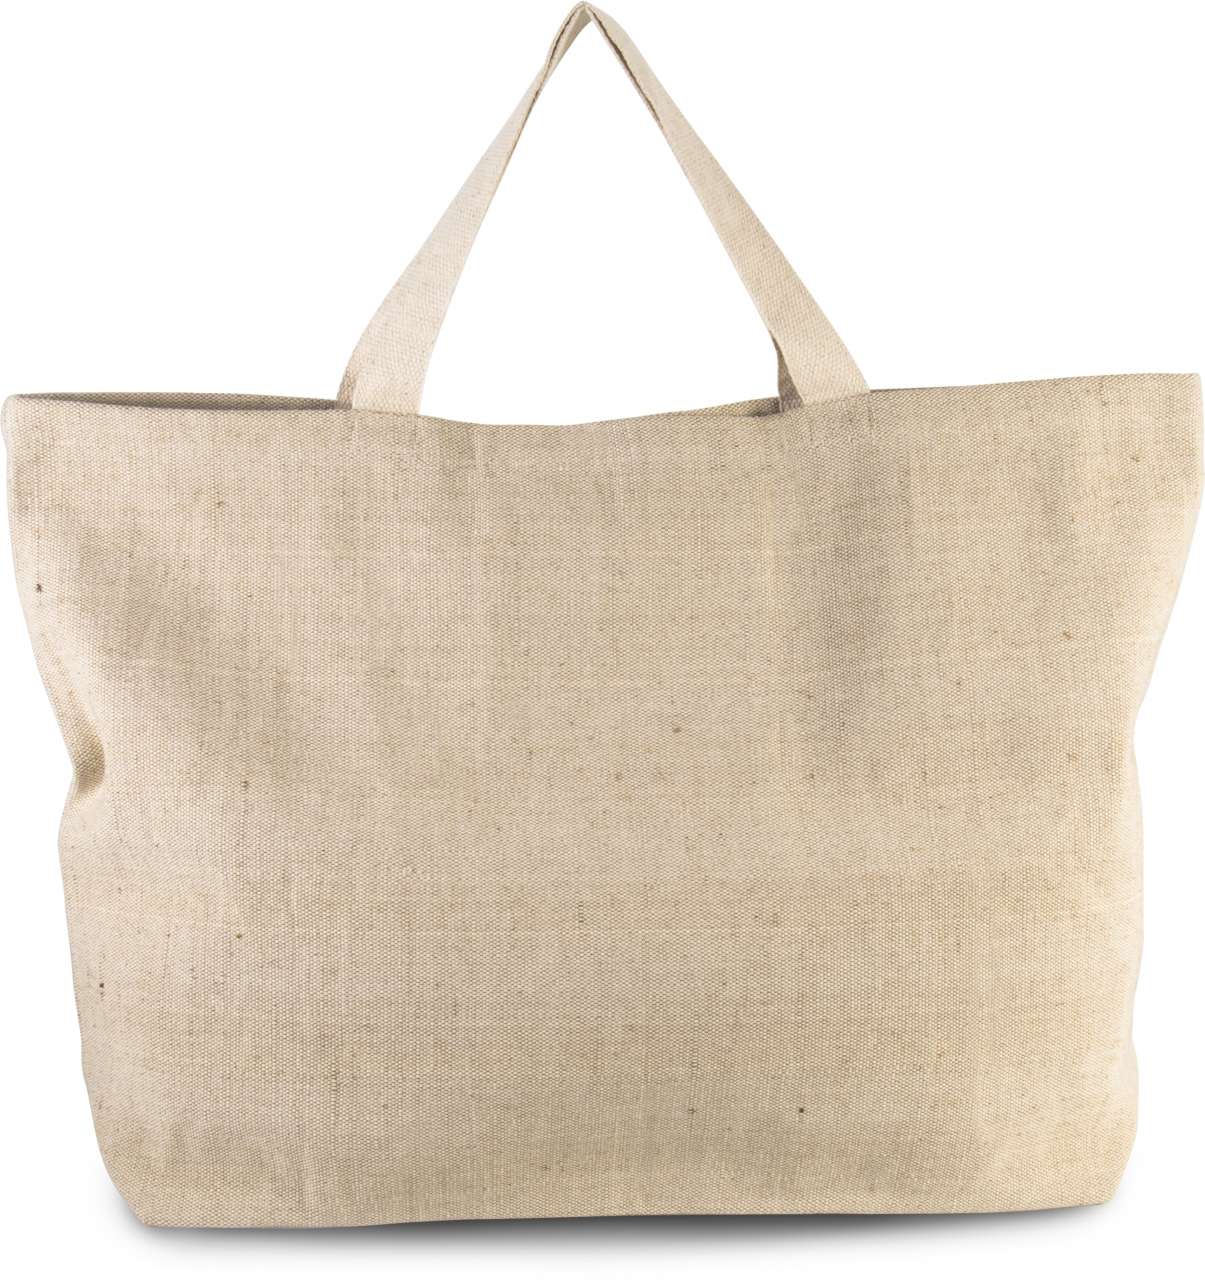 RUSTIC JUCO LARGE HOLD-ALL SHOPPER